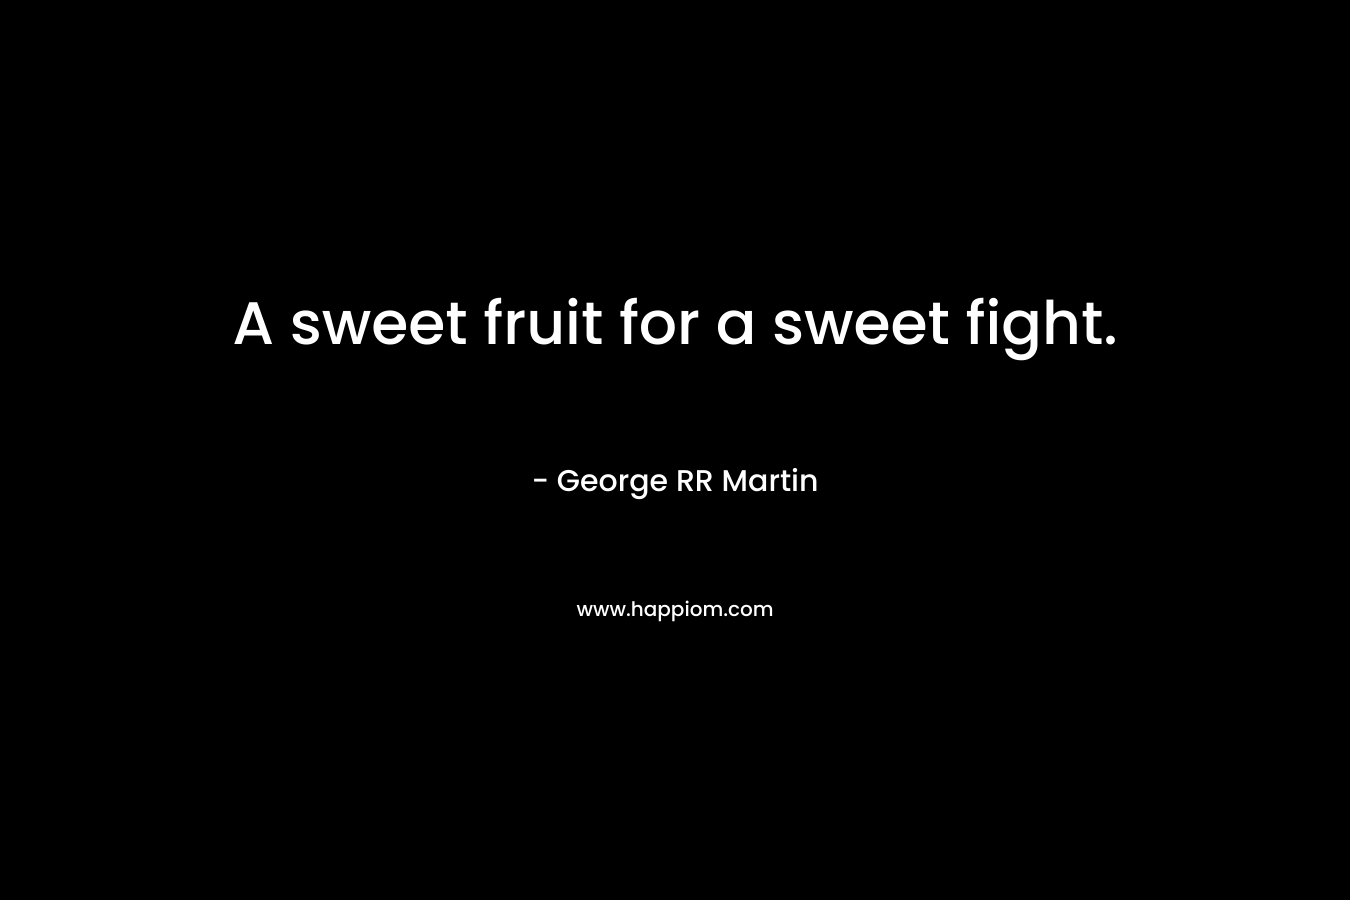 A sweet fruit for a sweet fight. – George RR Martin